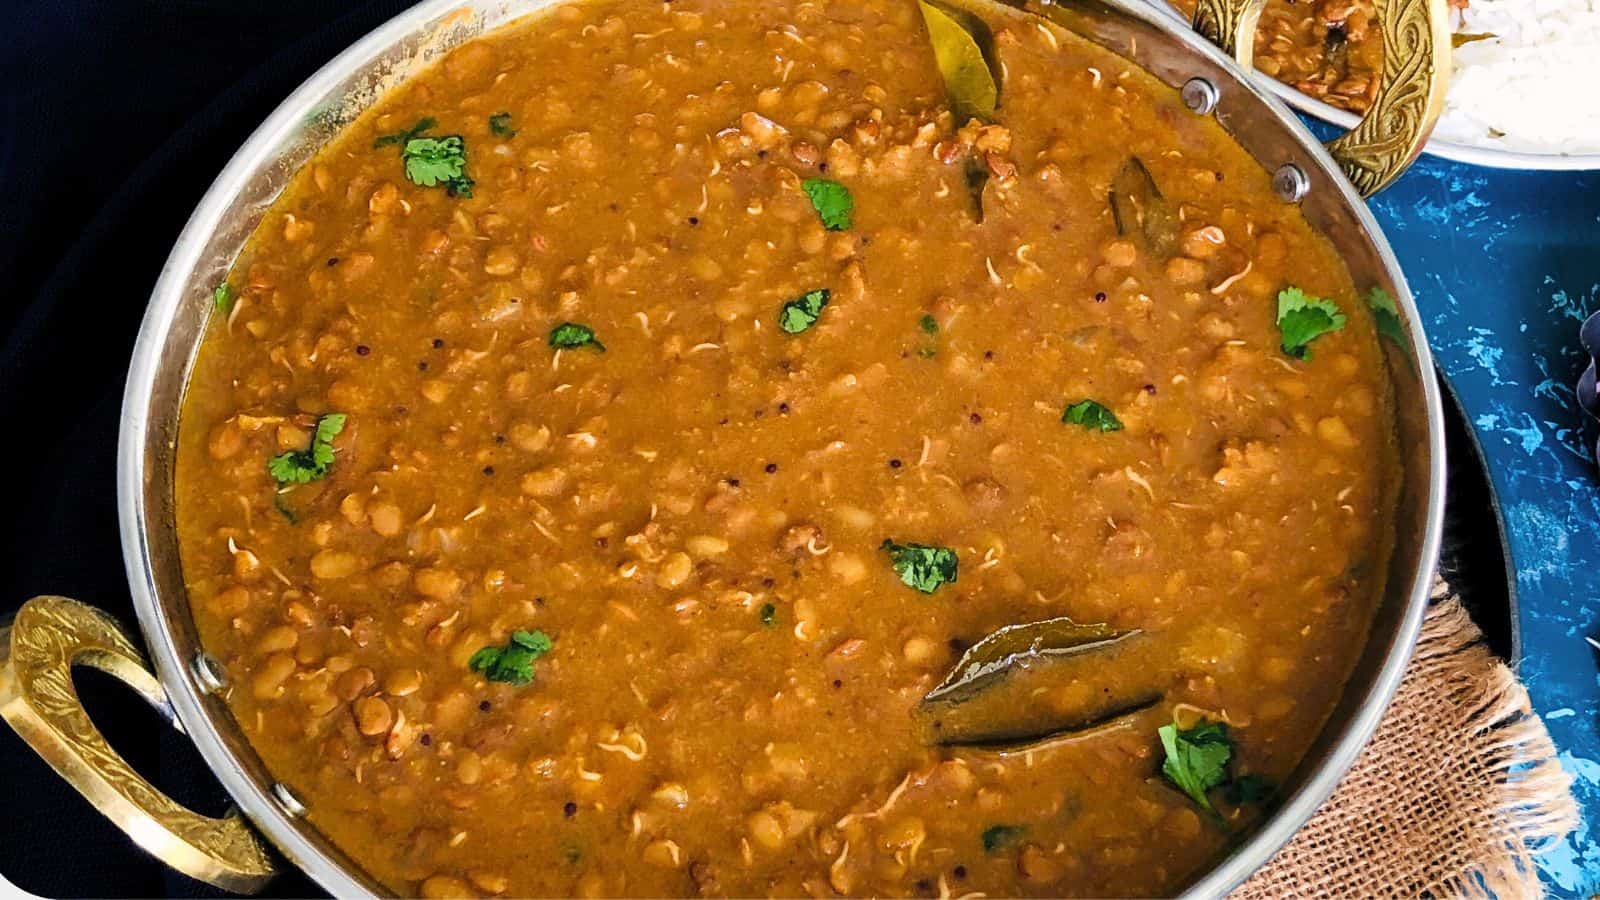 Hurali Saaru in a pot garnished with cilantro, featuring a rich, spiced lentil stew.